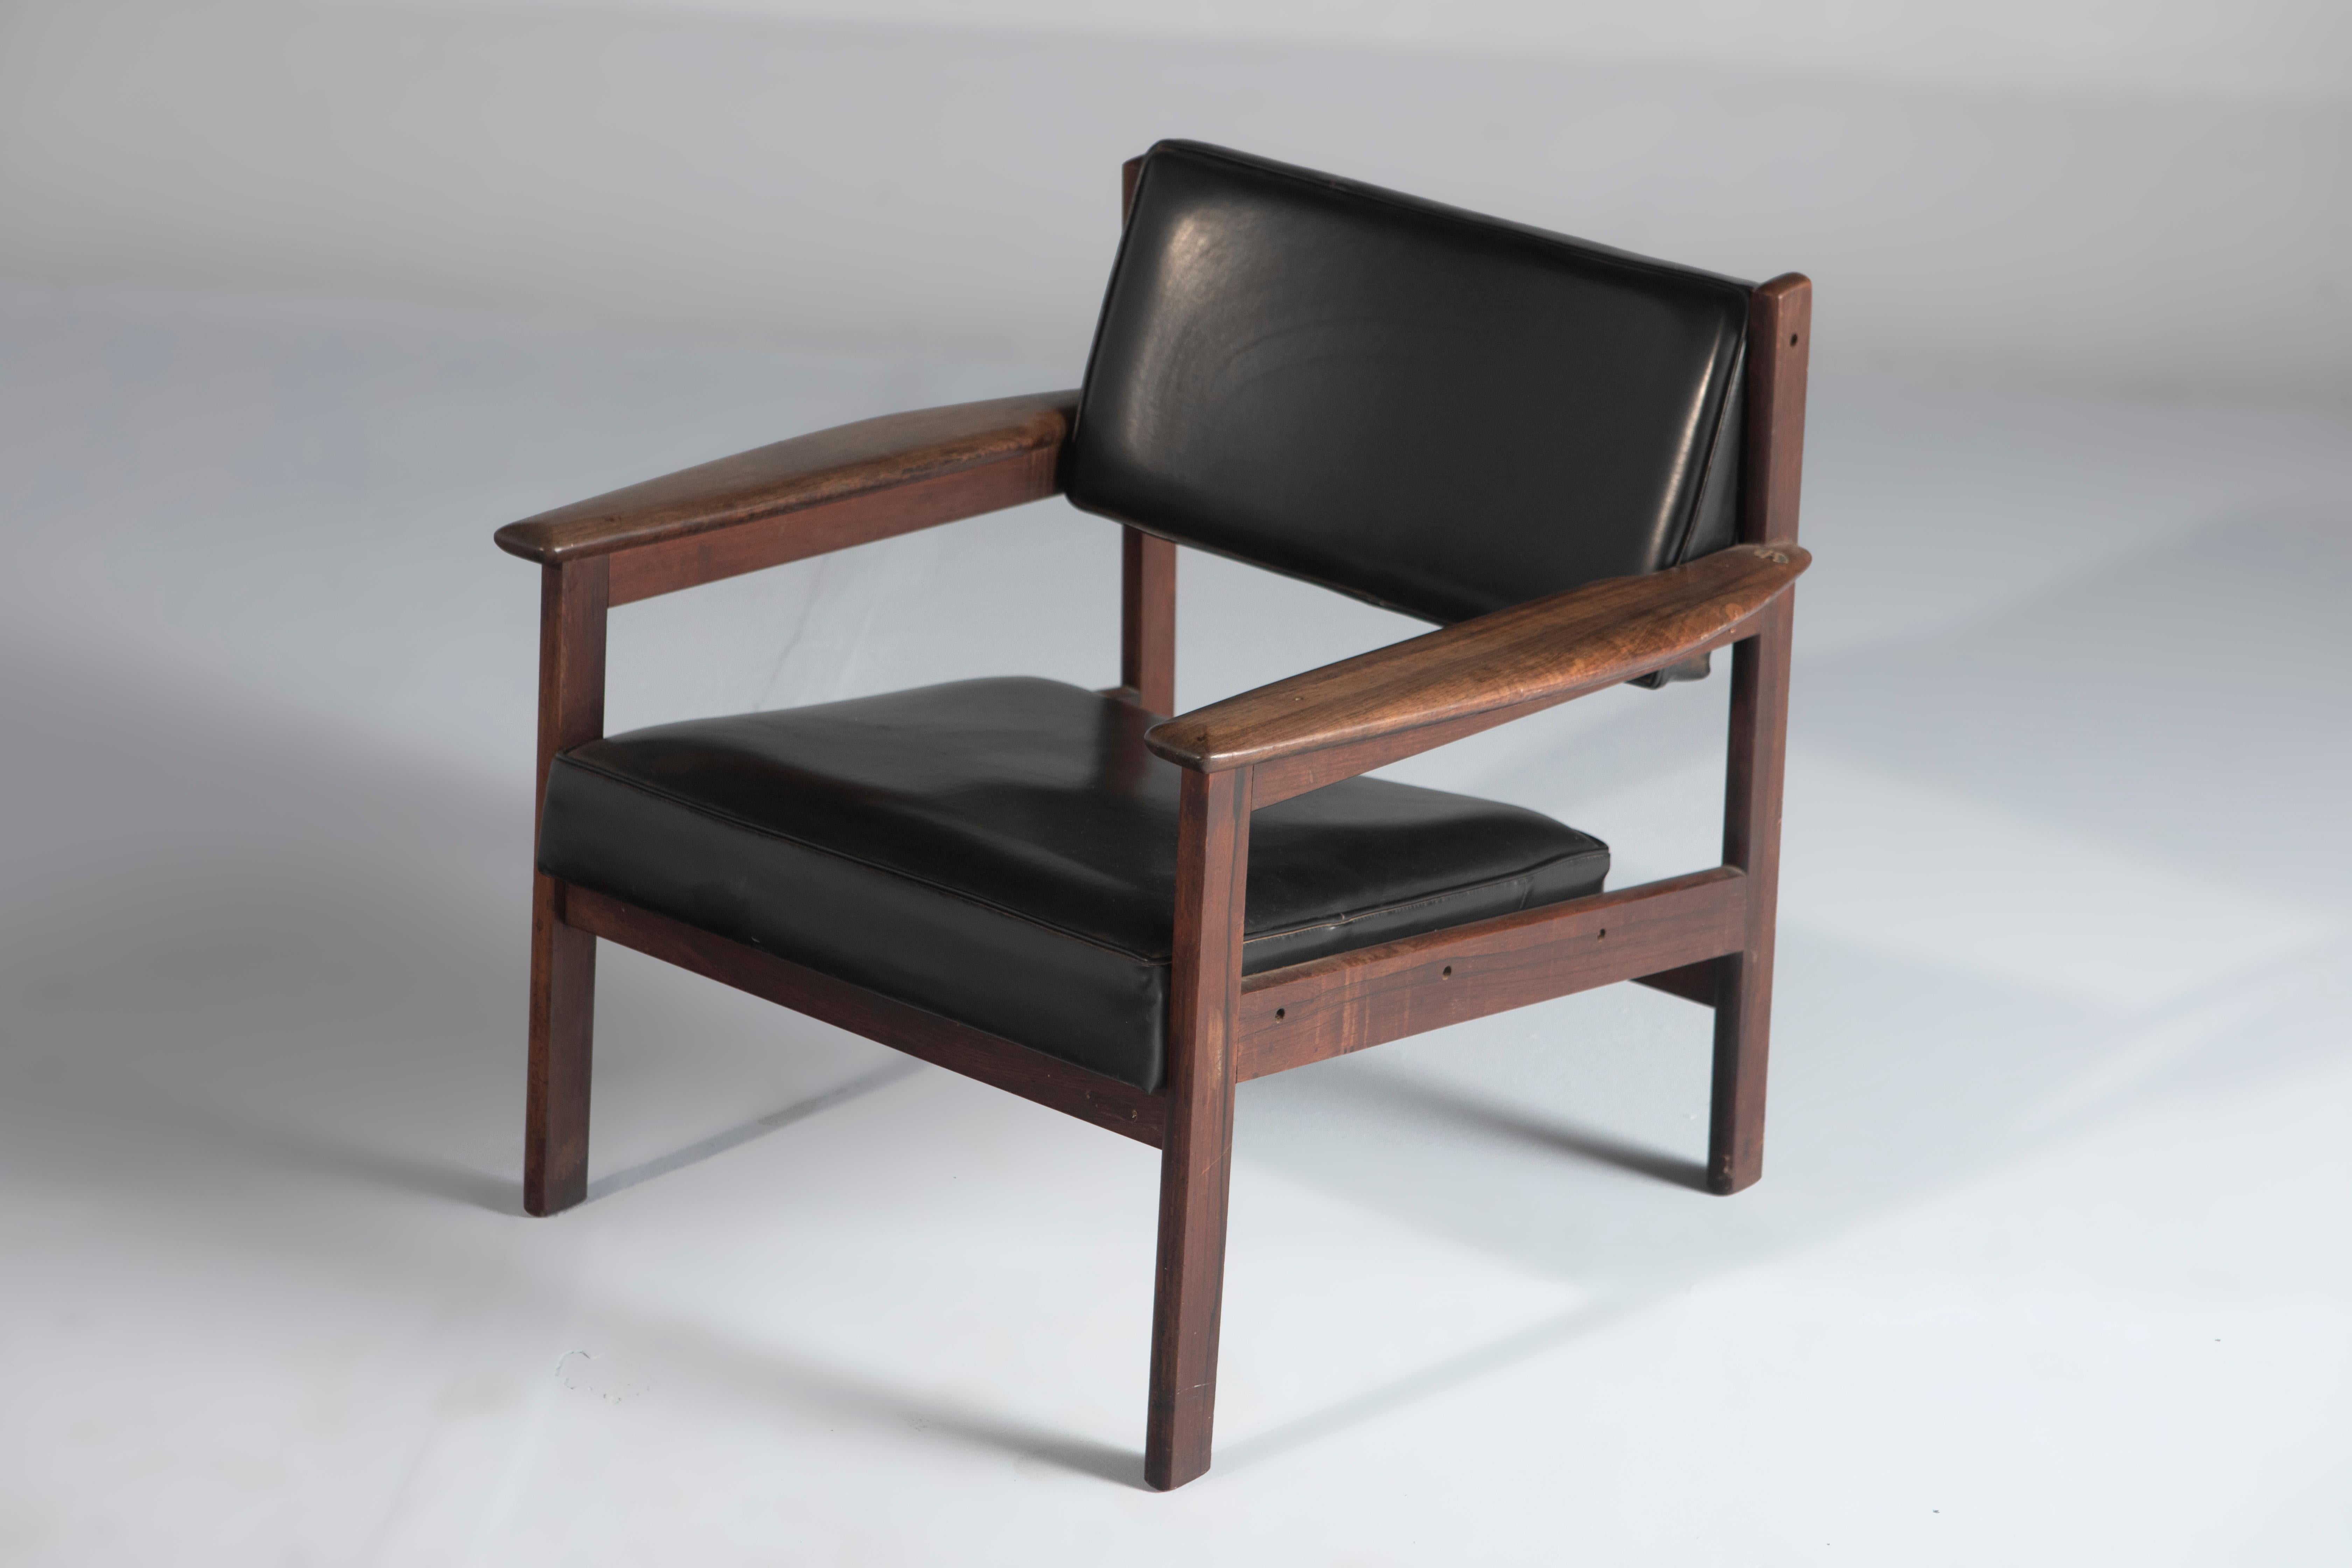 Woodwork Set of 2 Mid-Century Modern Drummond Armchair by Sergio Rodrigues, Brazil, 1950s